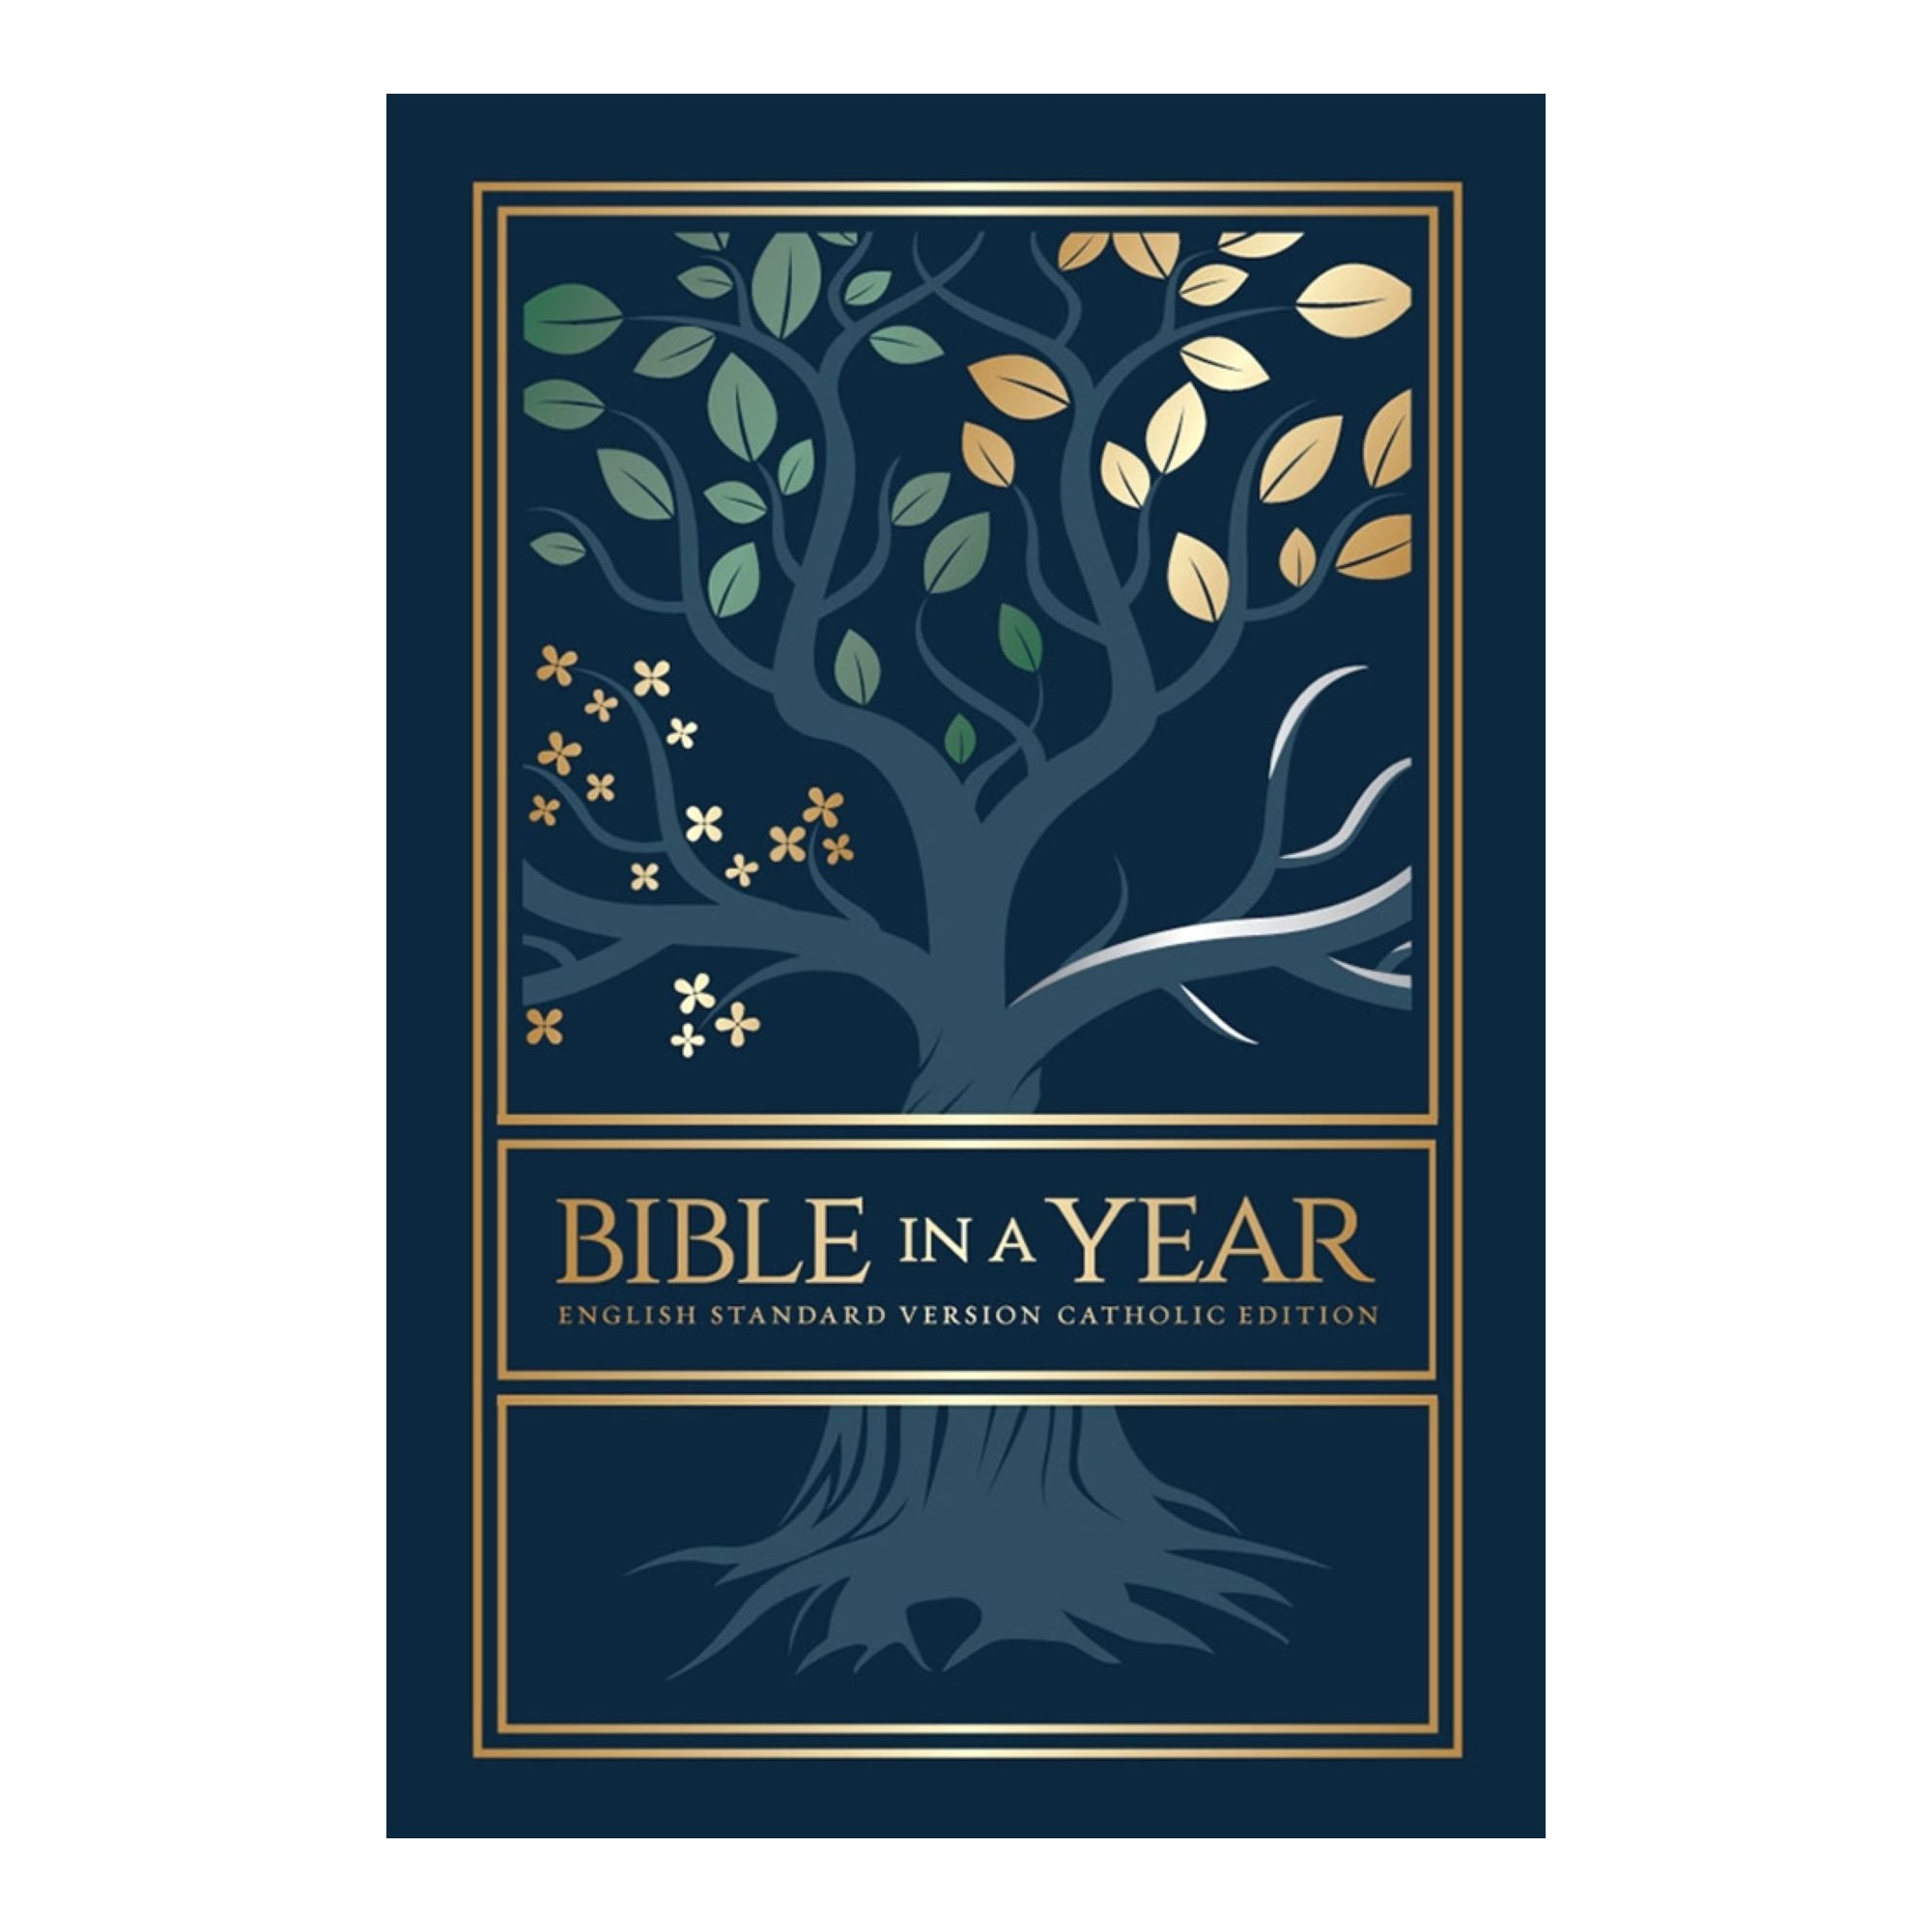 Bible in a Year English Standard Version Catholic Edition The